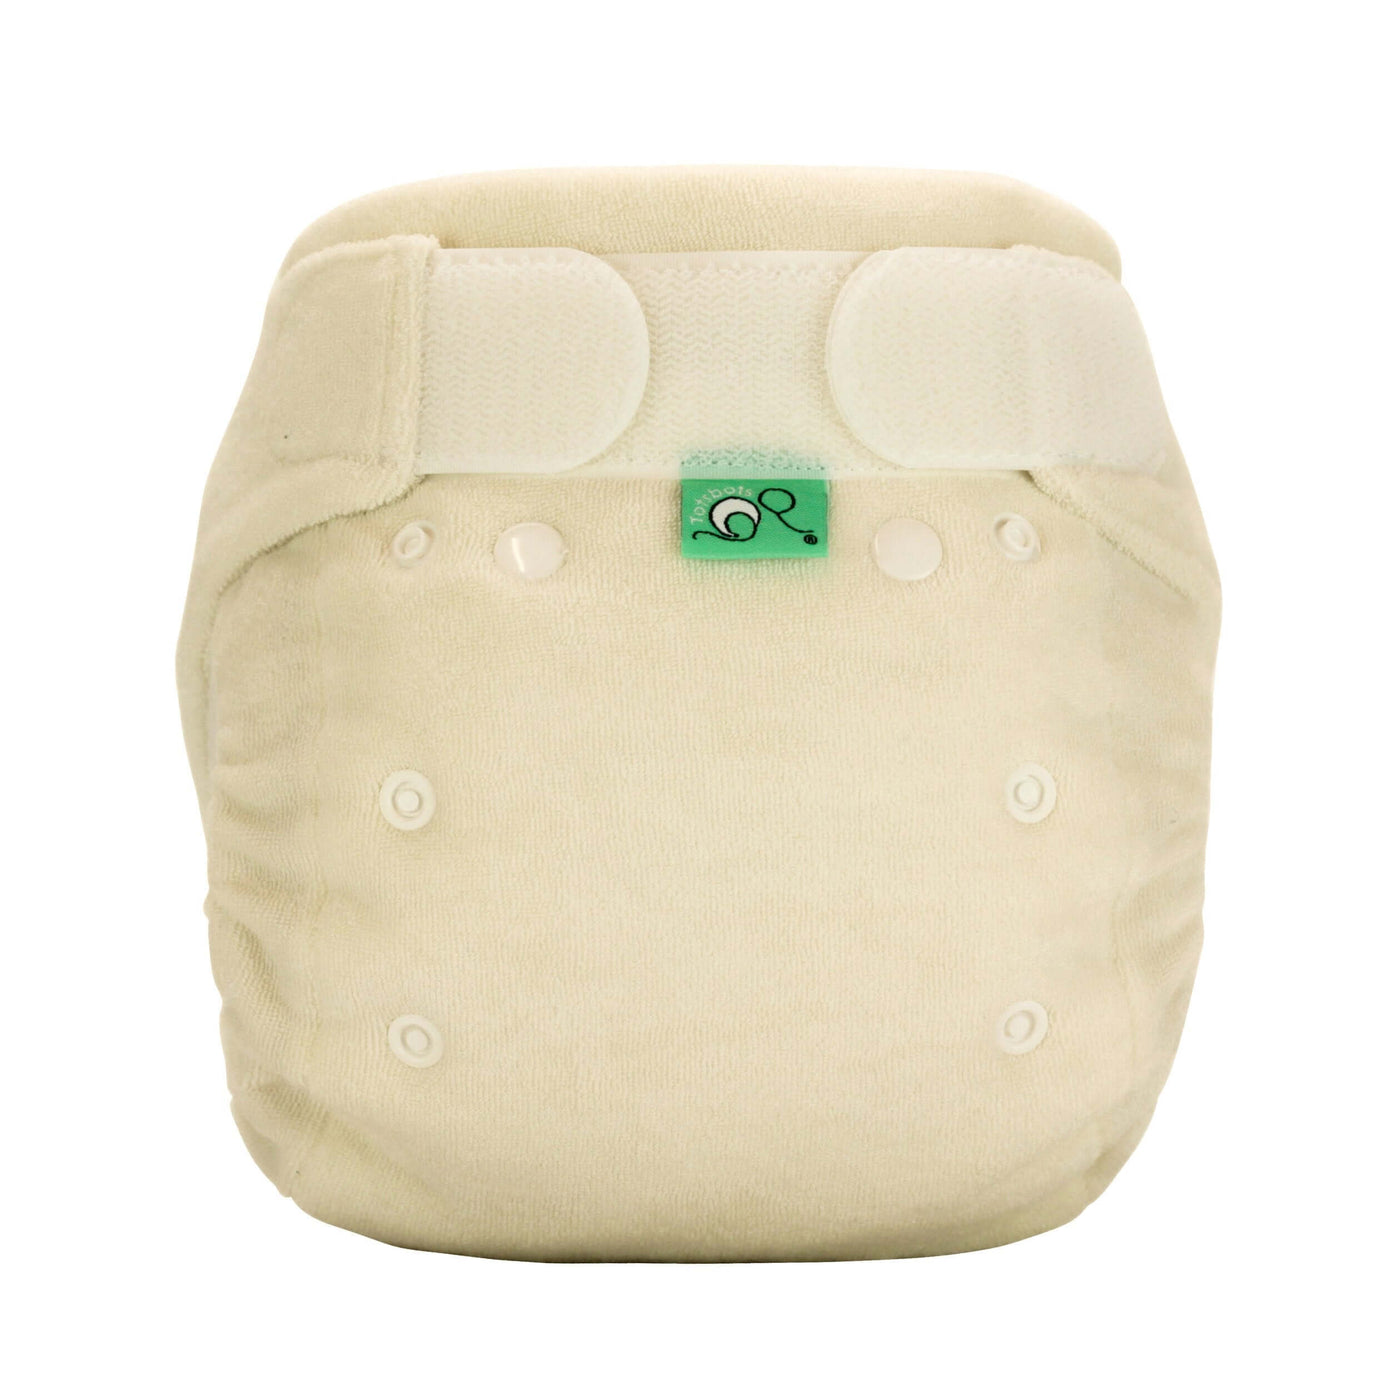 Tots Bots Bamboozle Stretch Nappy Colour: Natural Size: Size 2 (9-35lbs) reusable nappies Earthlets